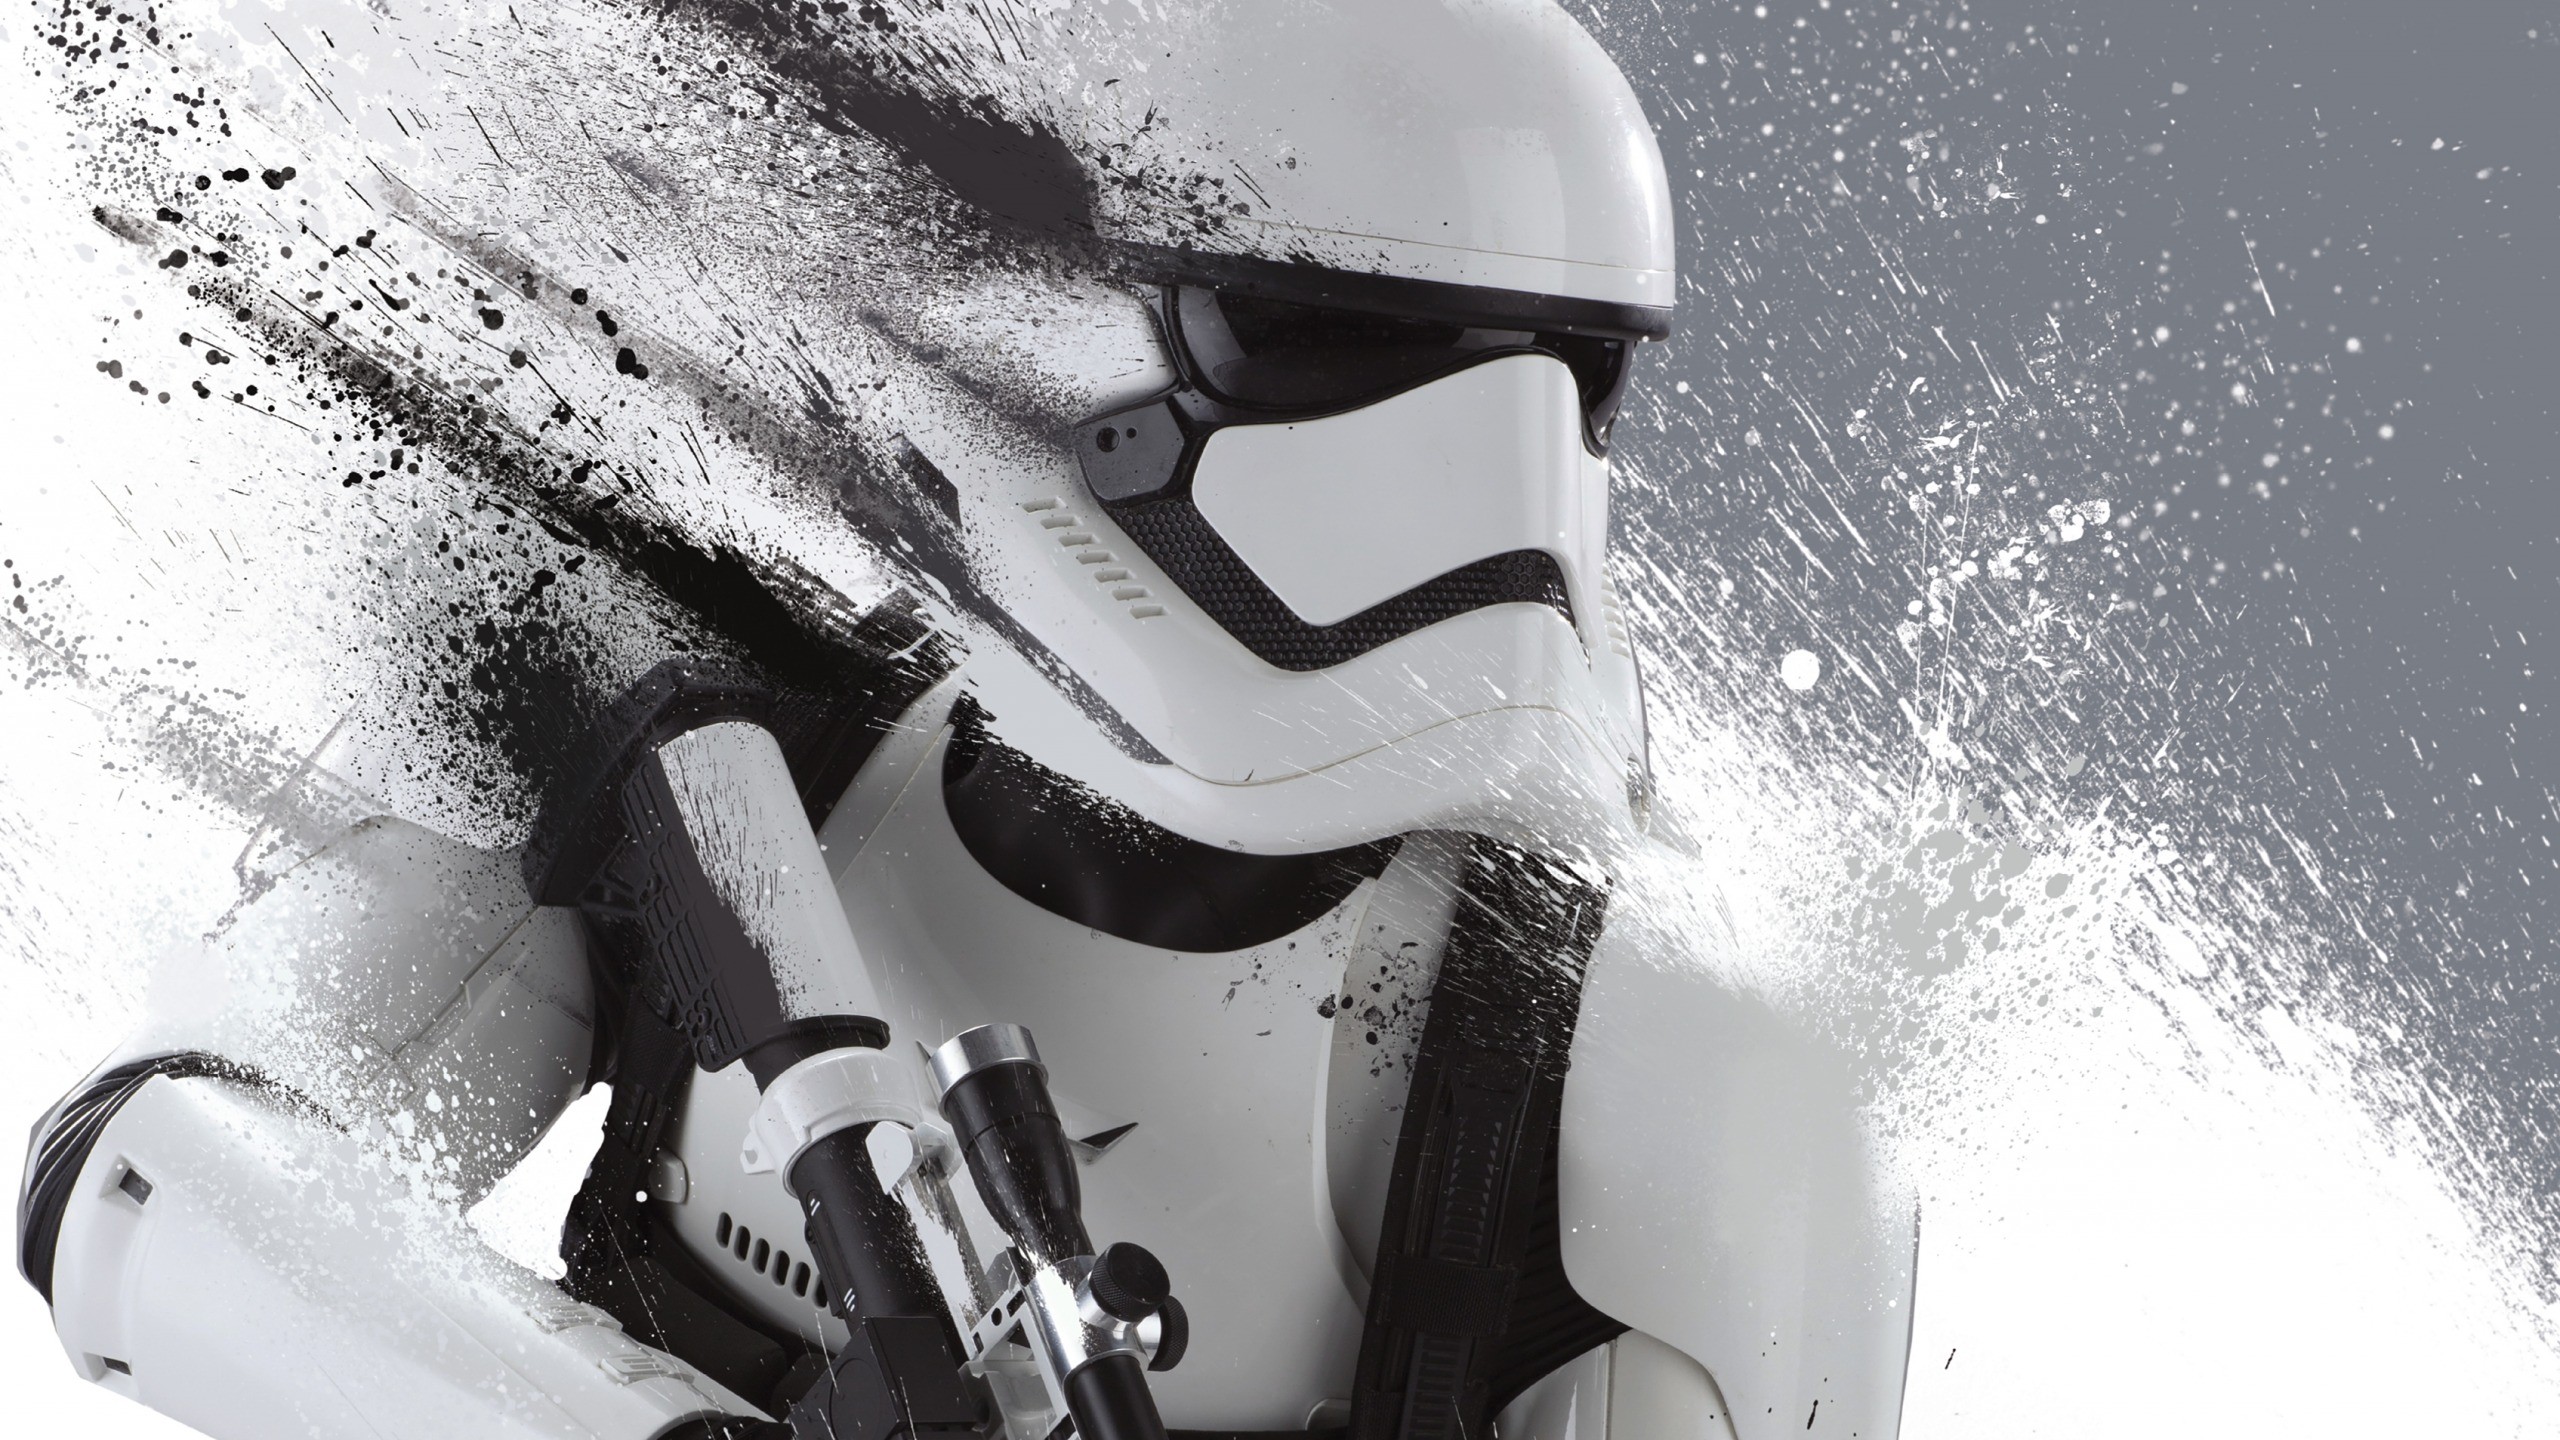 General 2560x1440 Star Wars Star Wars: The Force Awakens artwork multiple display dual monitors monochrome paint splatter fictional movie characters movies gray science fiction First Order Trooper